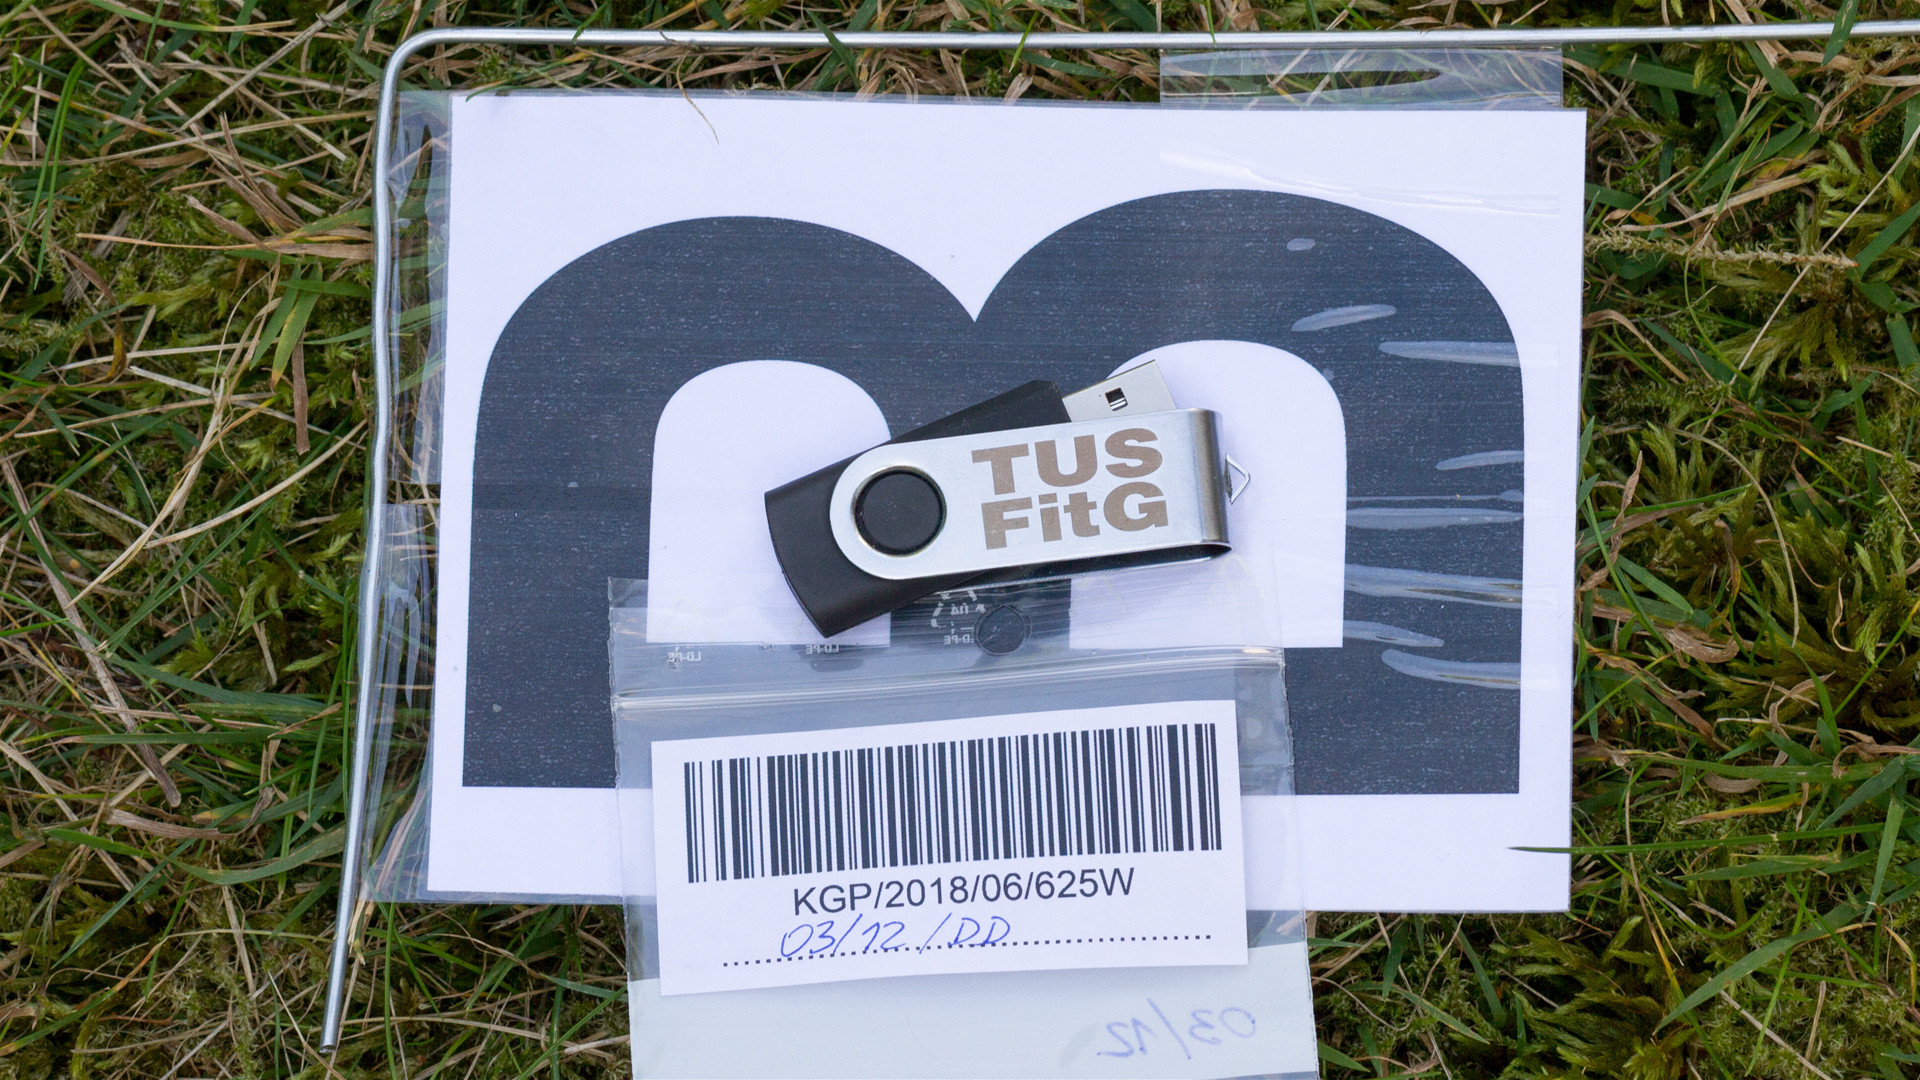 The USB Stick Found In The Grass Steam CD Key